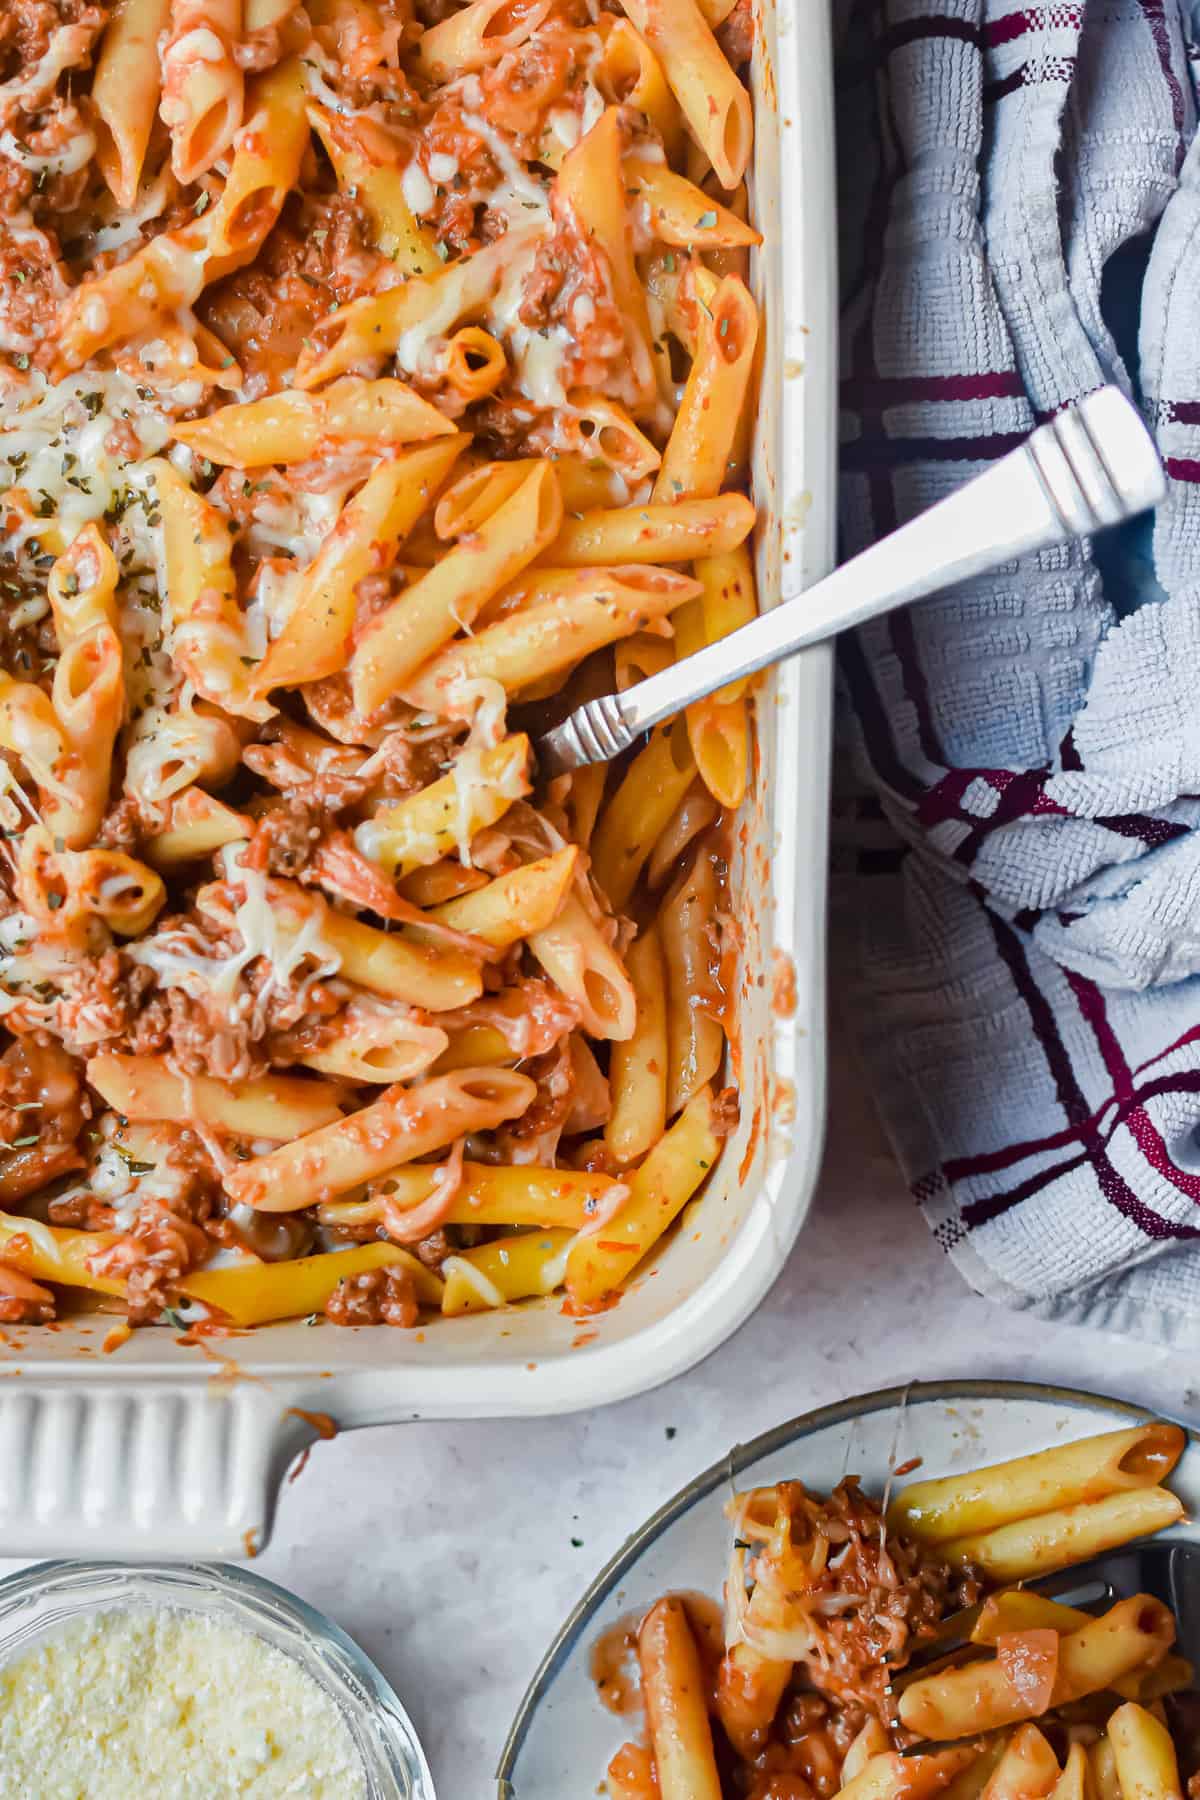 Meaty marinara pasta in a white baking dish with various effects in the background.